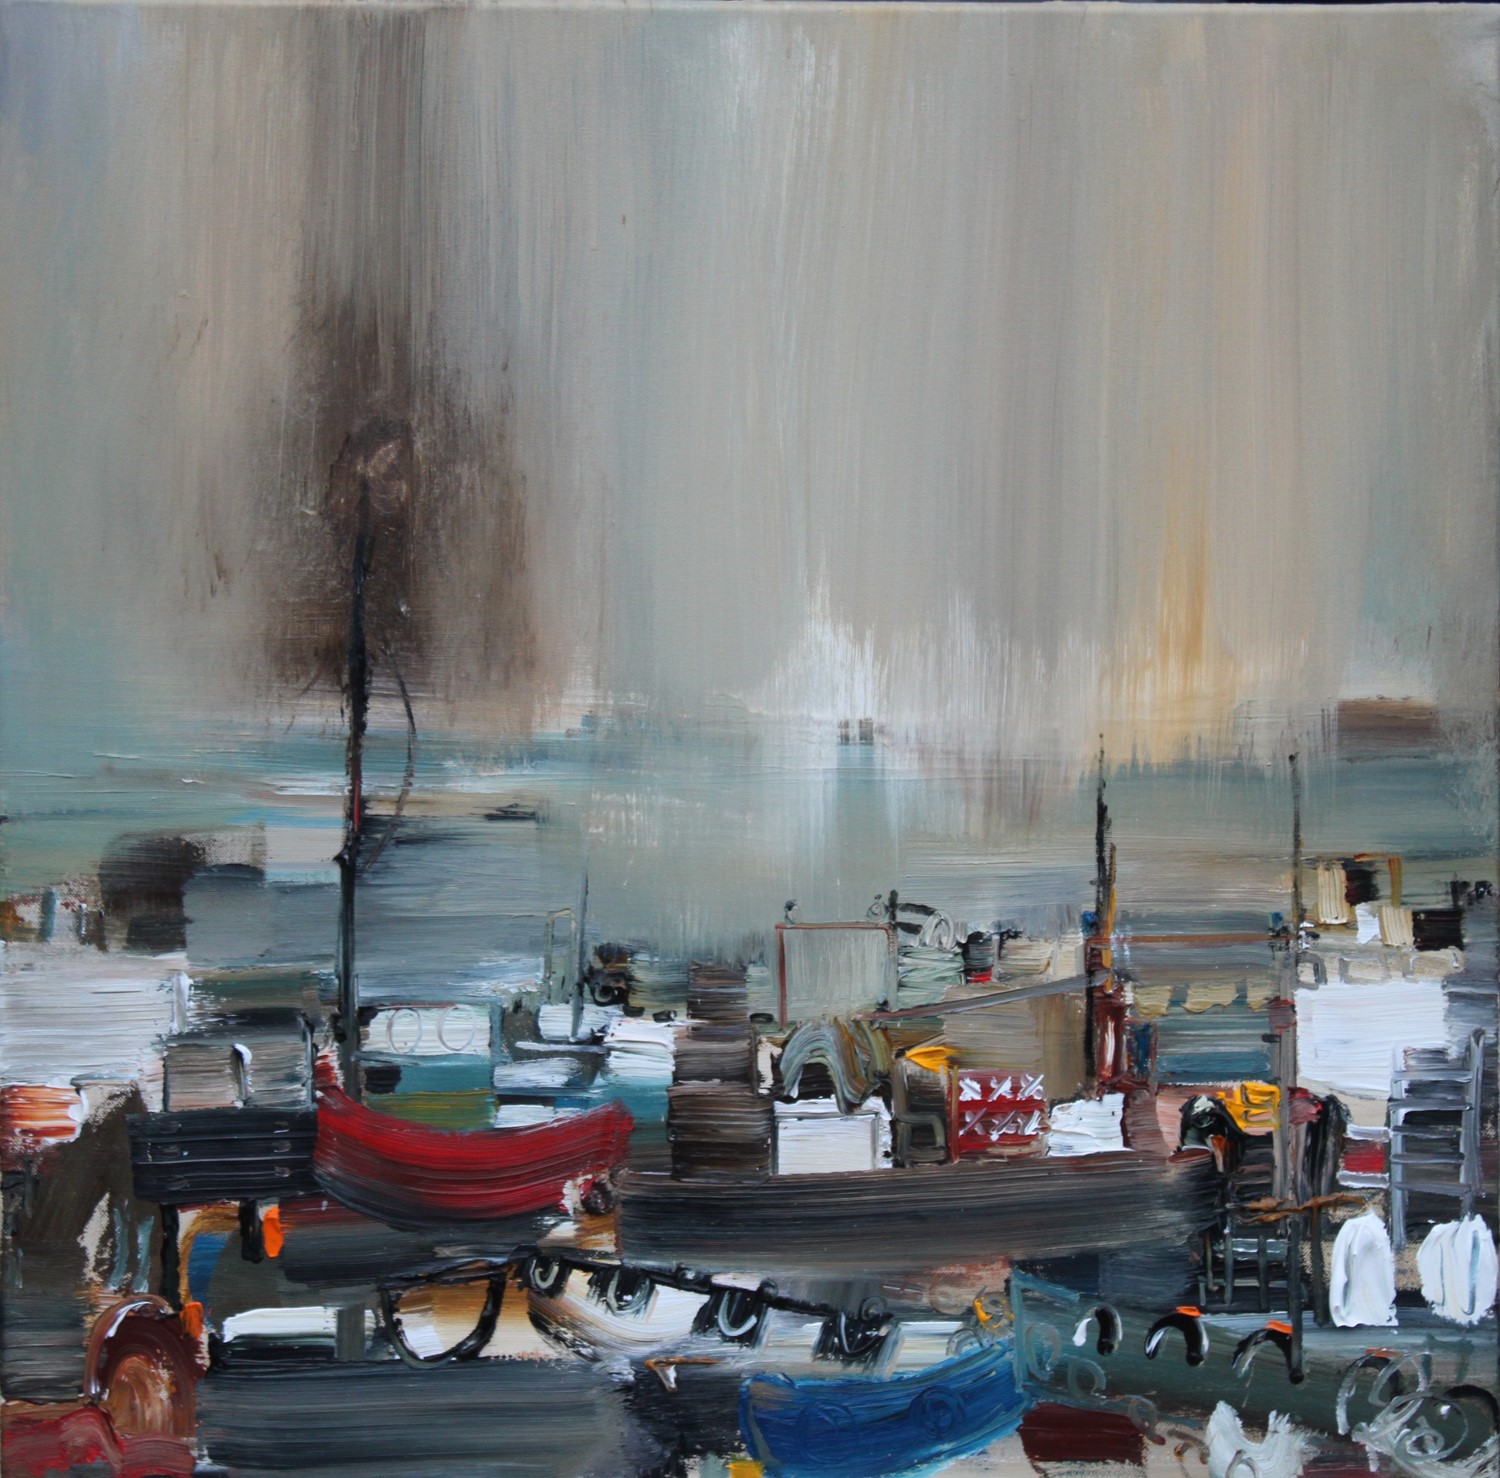 'Bustling with Boats' by artist Rosanne Barr